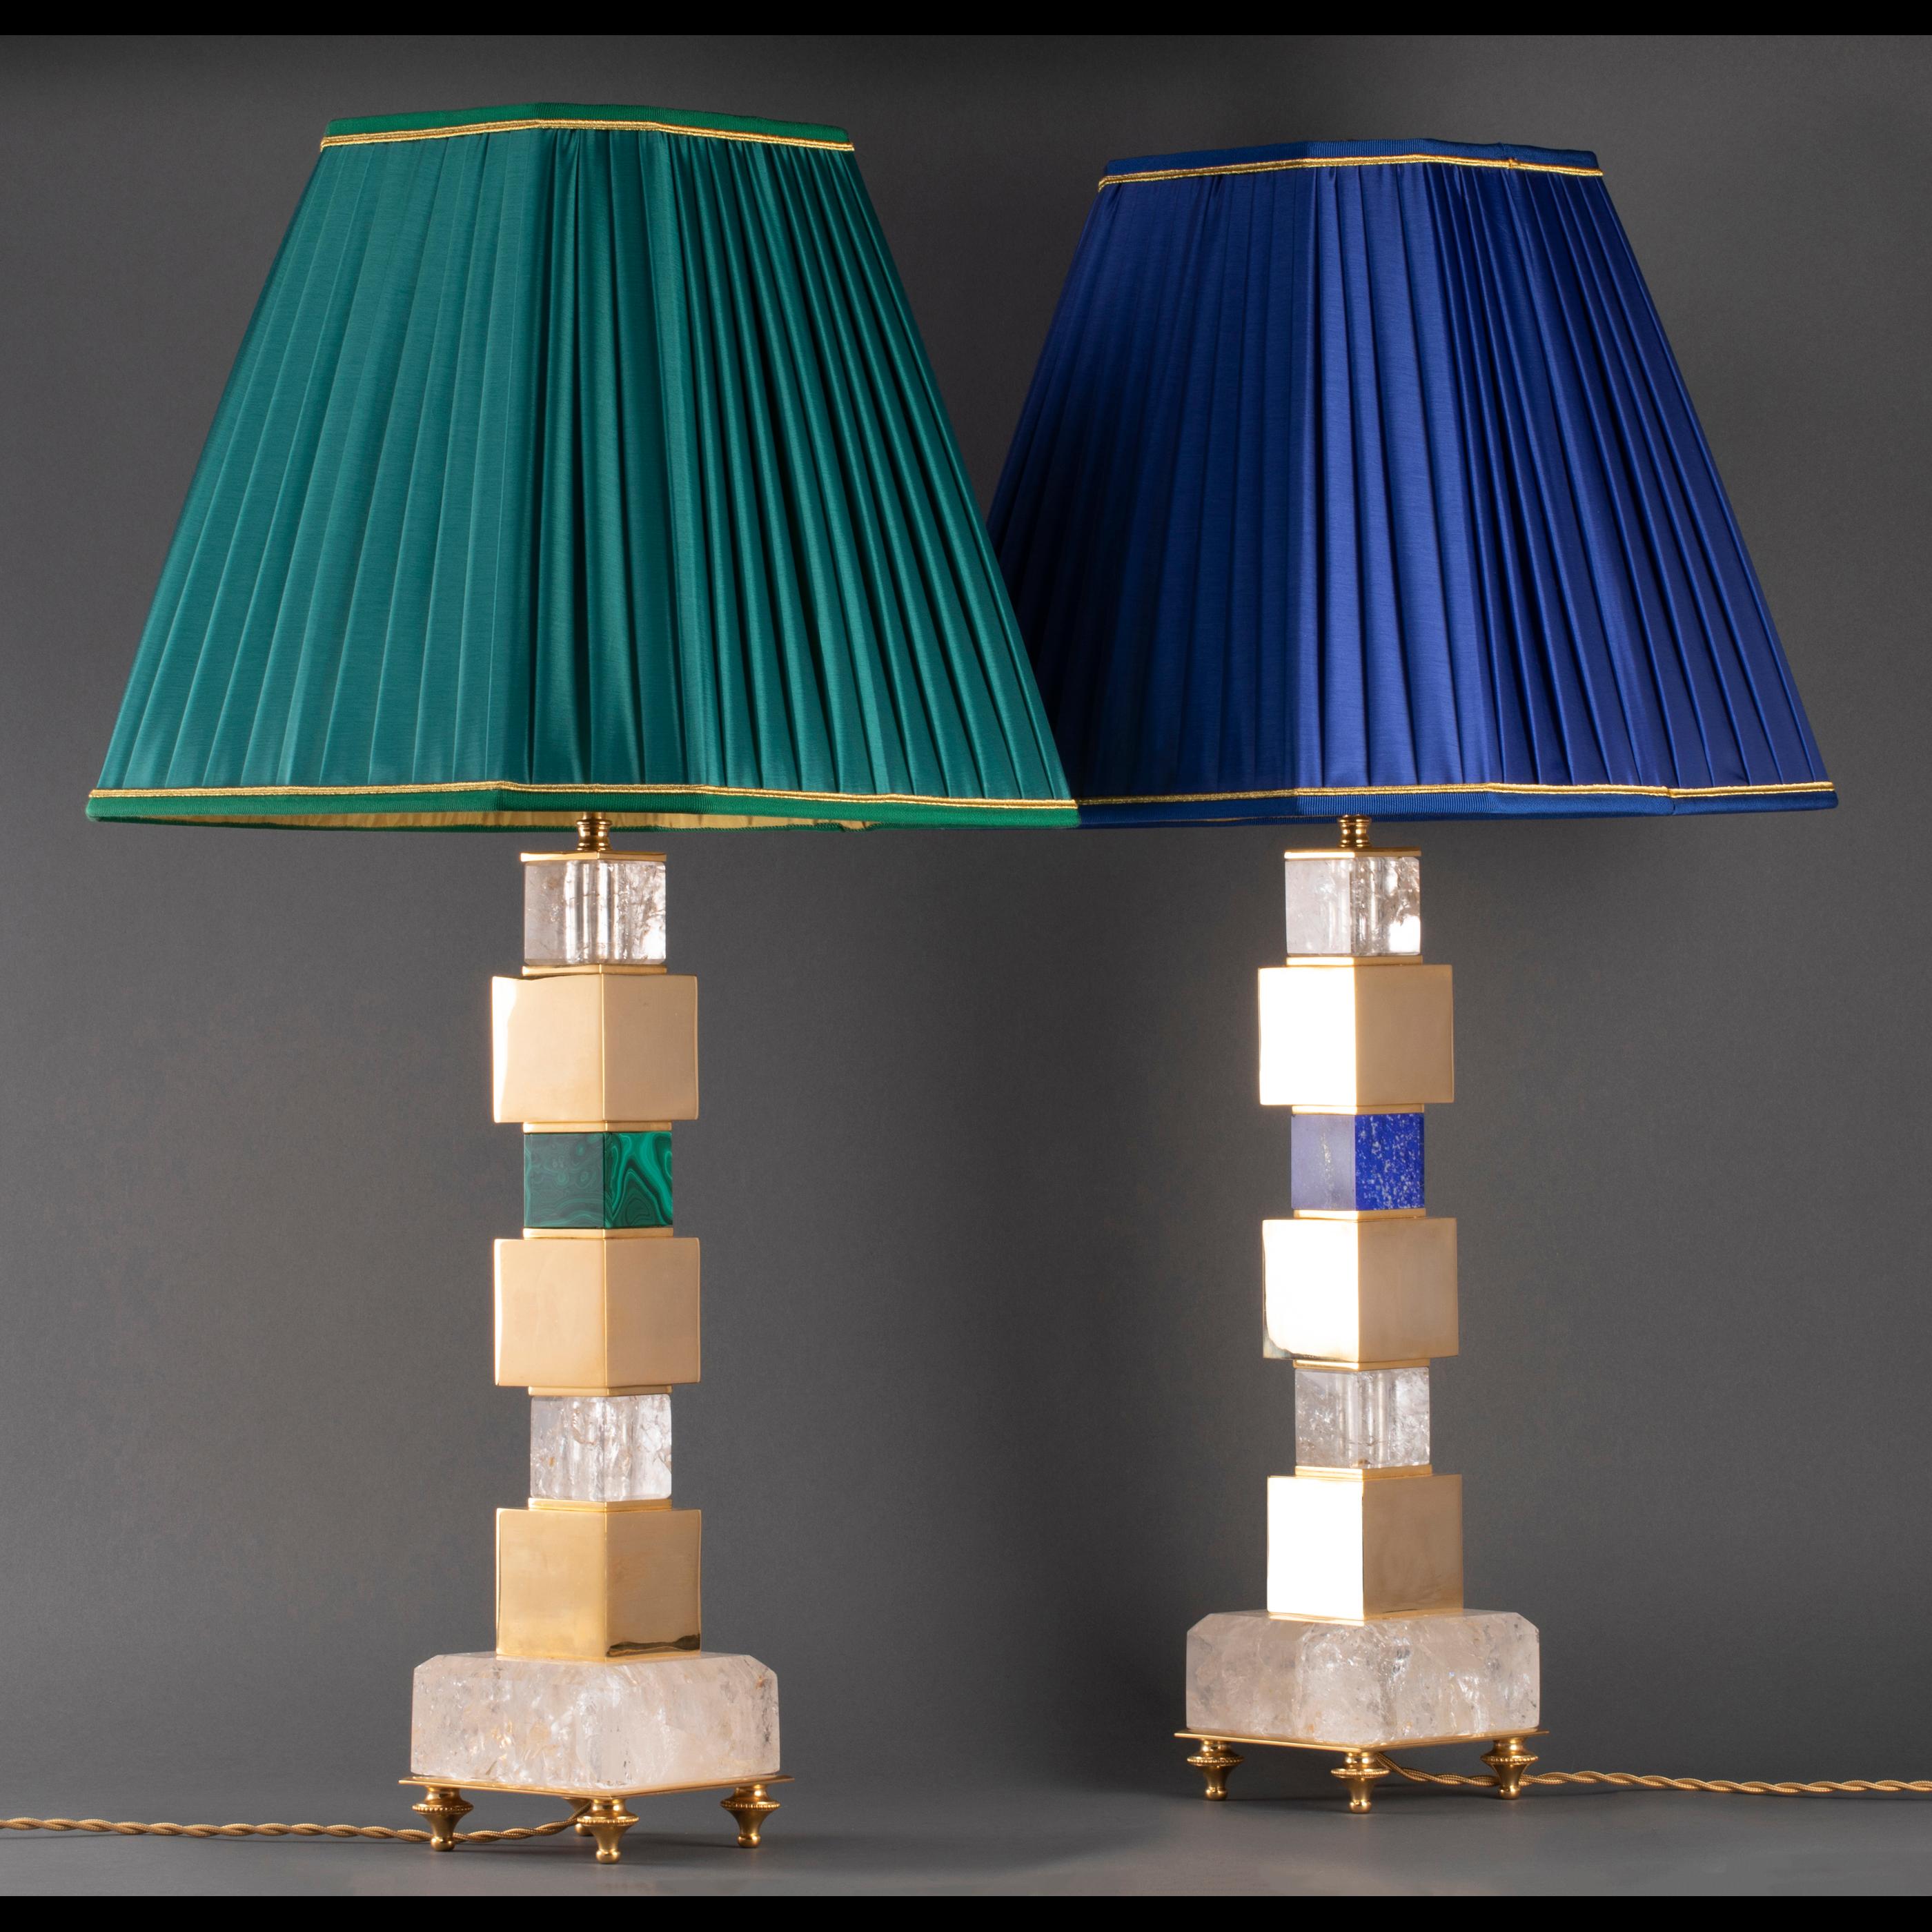 Pair of rock crystal 24-karat gold-plated and malachite lamps.
Handmade in France.
Could be also made in lapis lazuli.
Design by Alexandre Vossion.